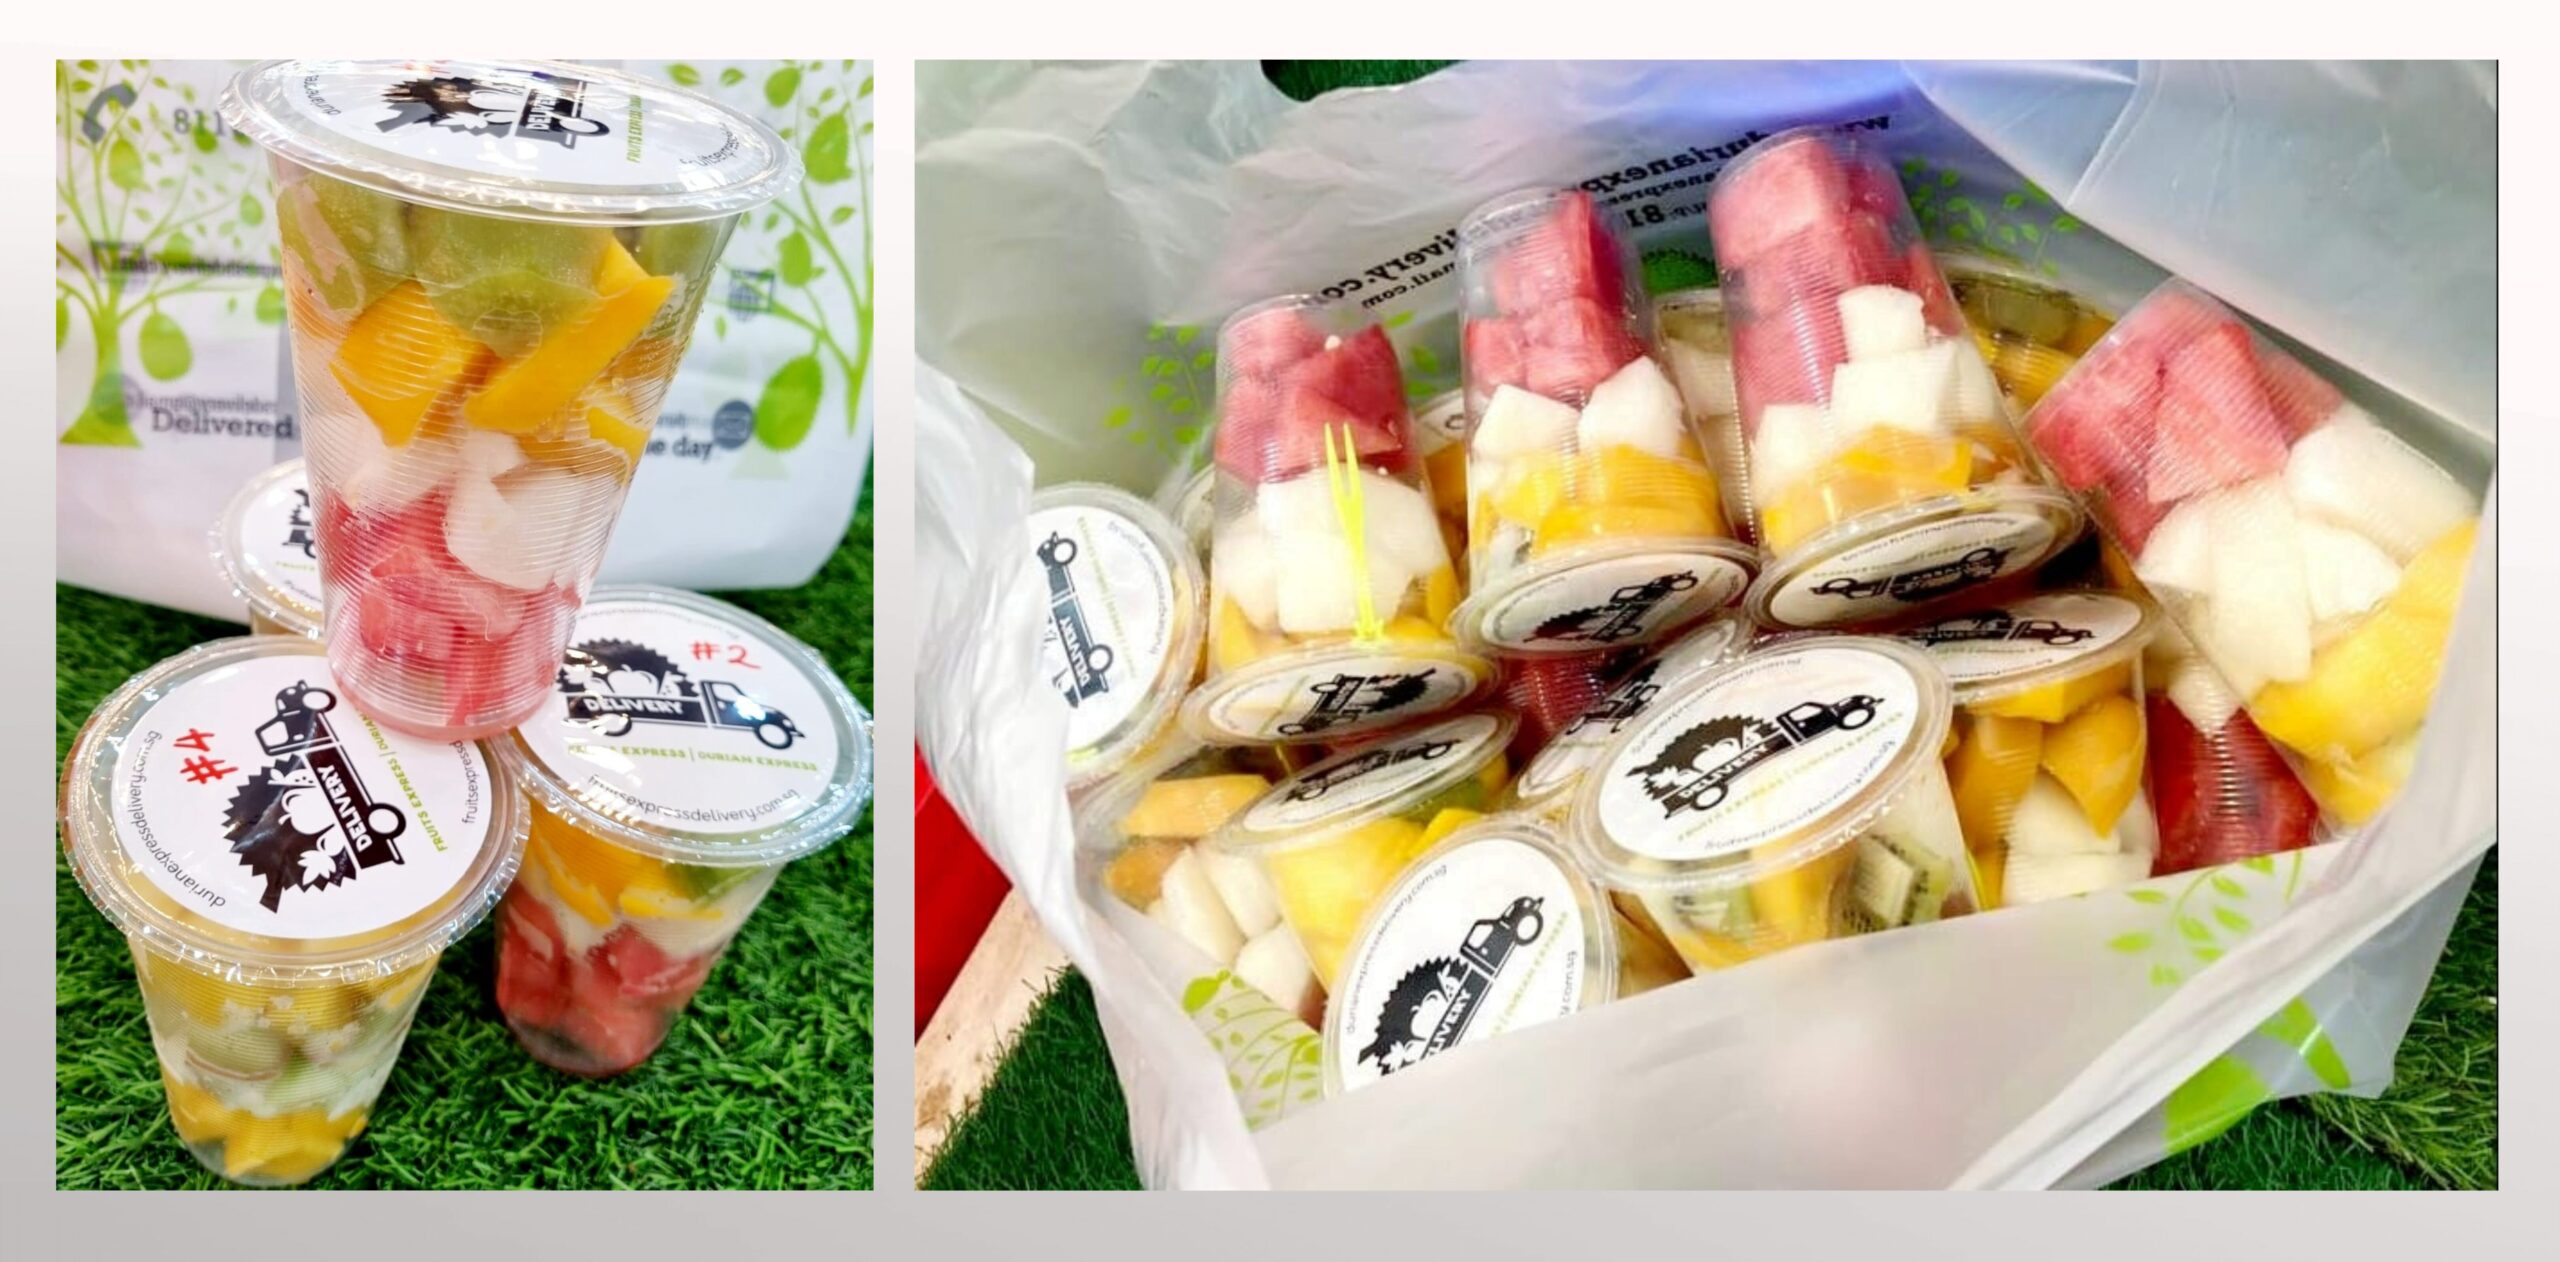 Fruit cup delivery in singapore - convenient & healthy option